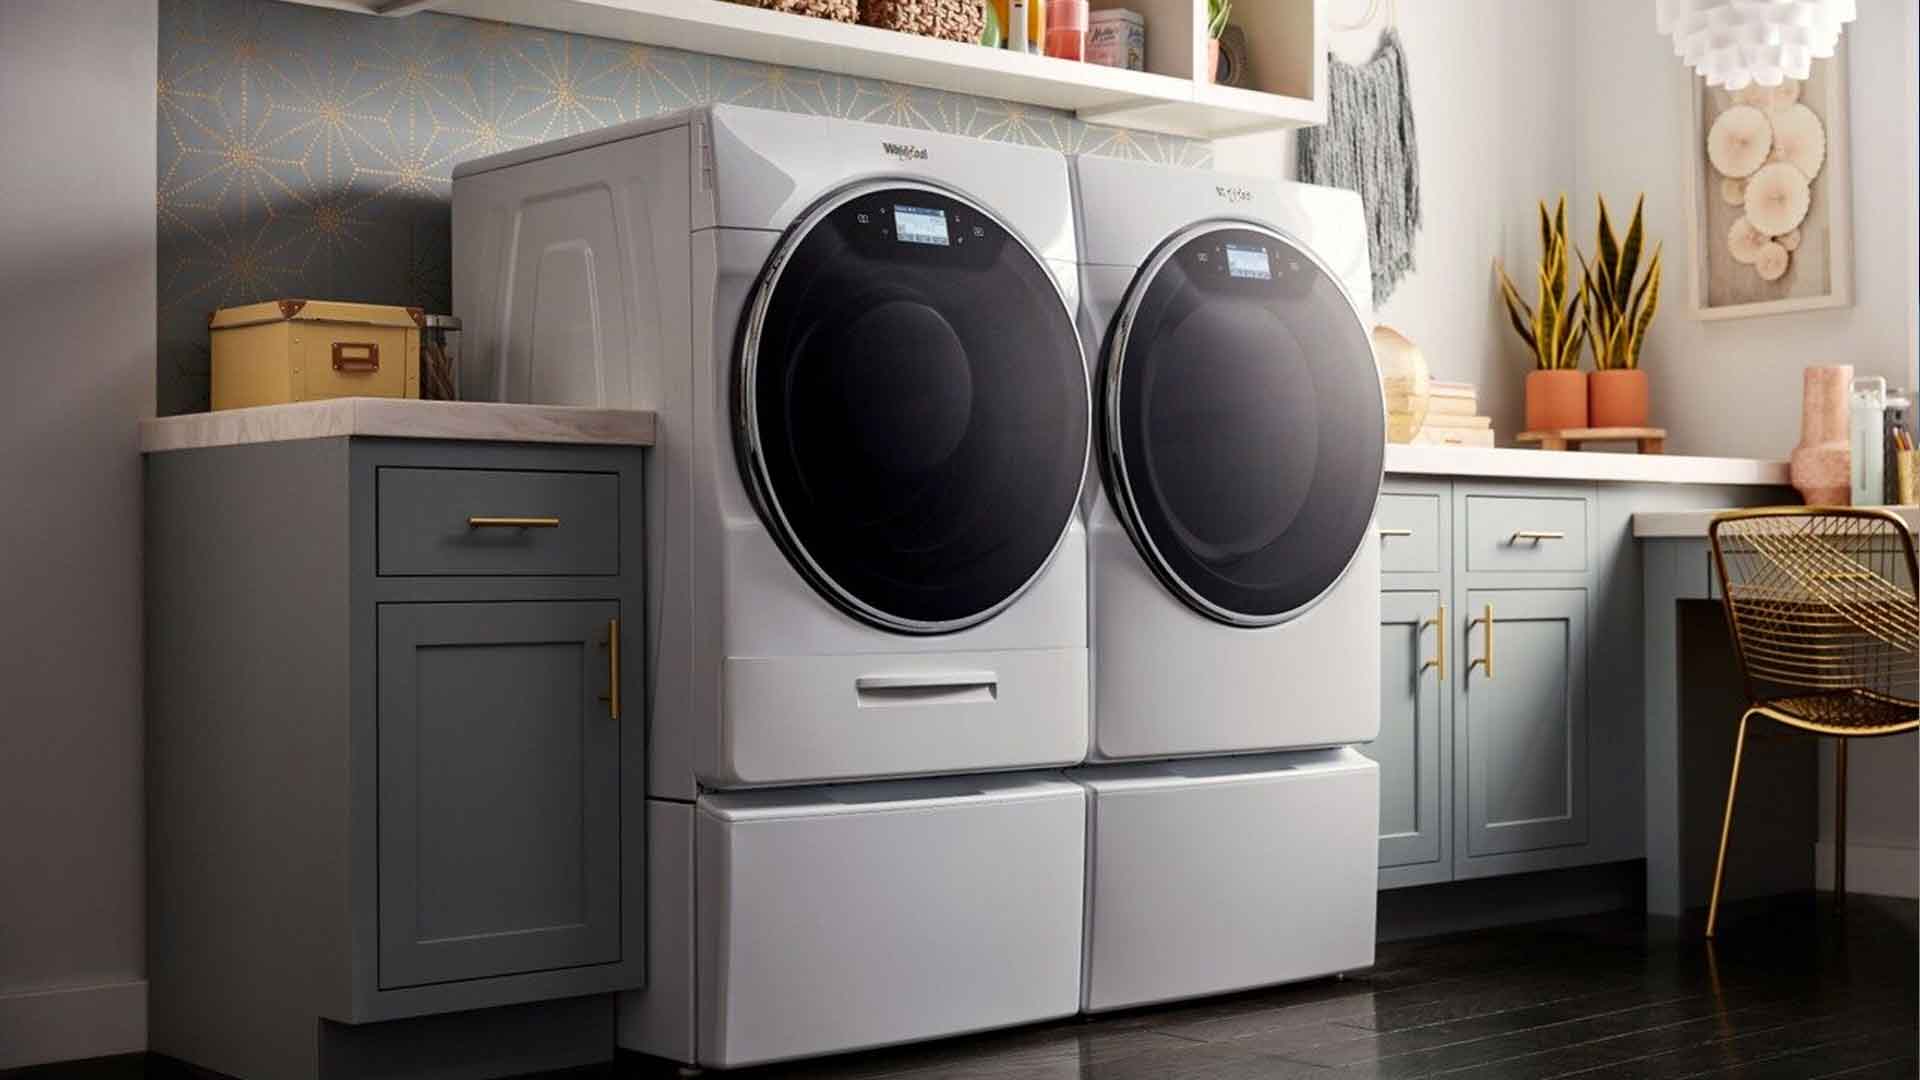 Whirlpool Front Load Washer Service | Whirlpool Appliance Repairs